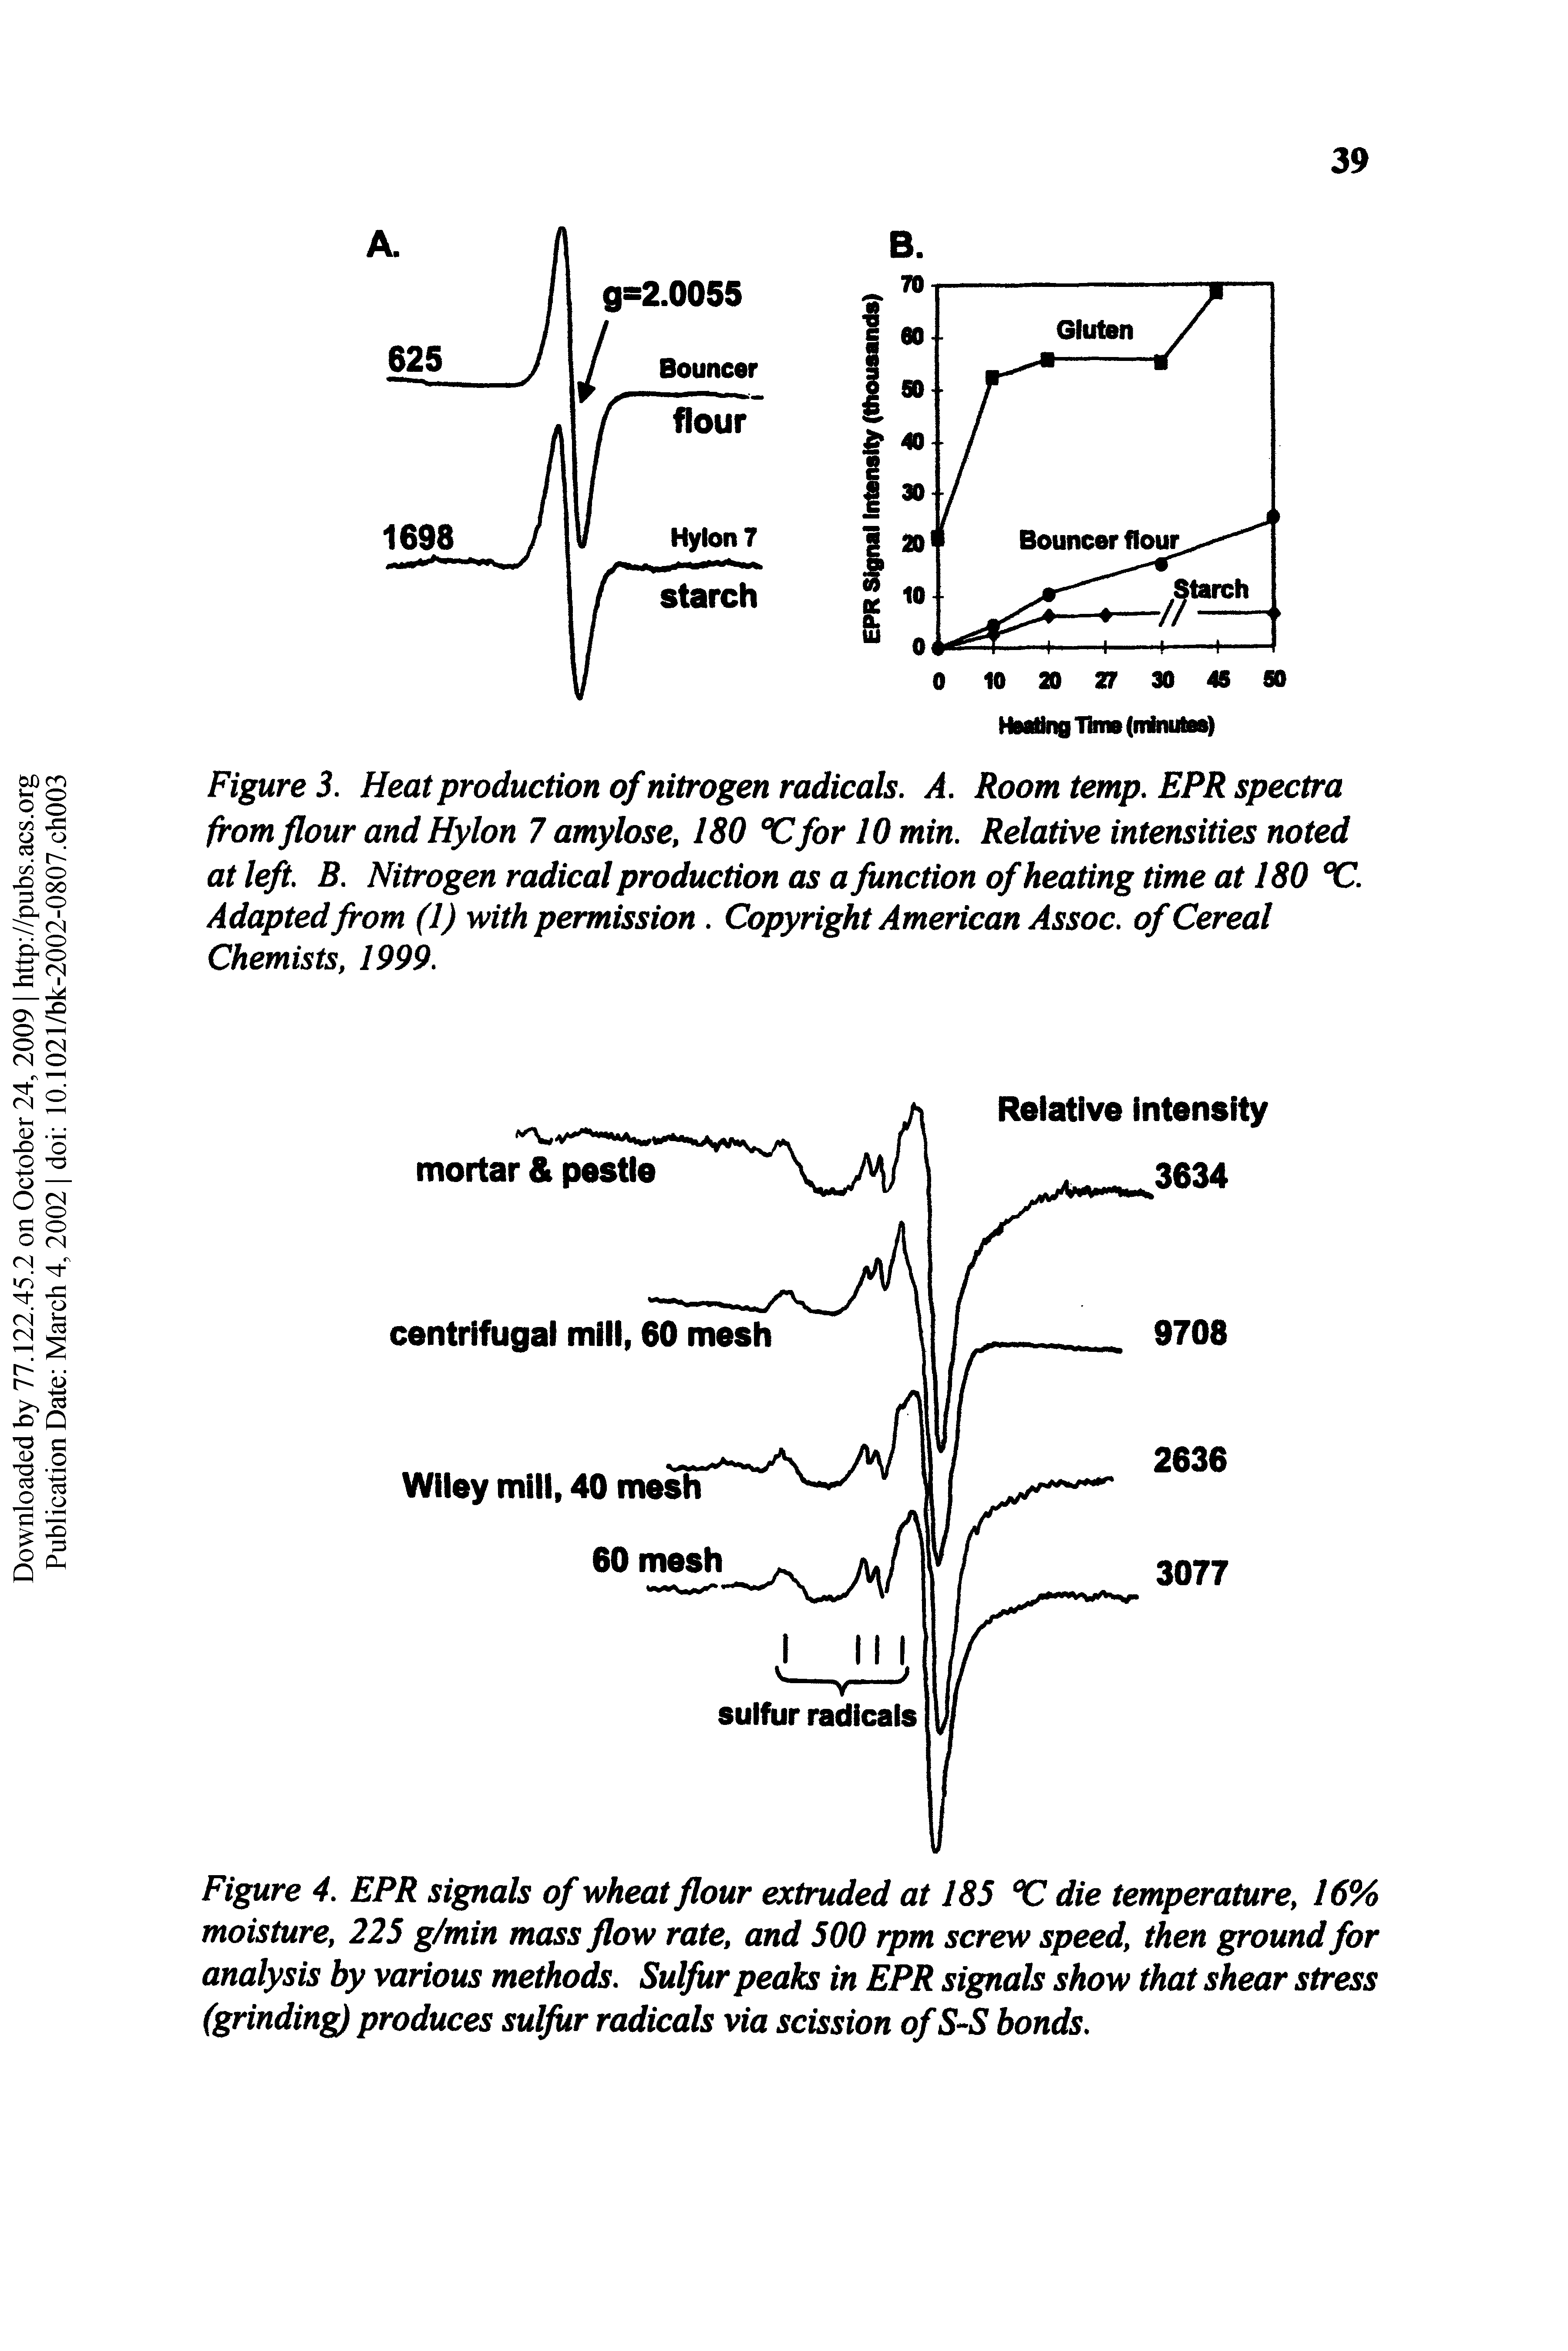 Figure 4. EPR signals of wheat flour extruded at 185 X die temperature, 16% moisture, 225 g/min mass flow rate, and 500 rpm screw speed, then ground for analysis by various methods. Sulfur peaks in EPR signals show that shear stress (grinding) produces sulfur radicals via scission of S-S bonds.